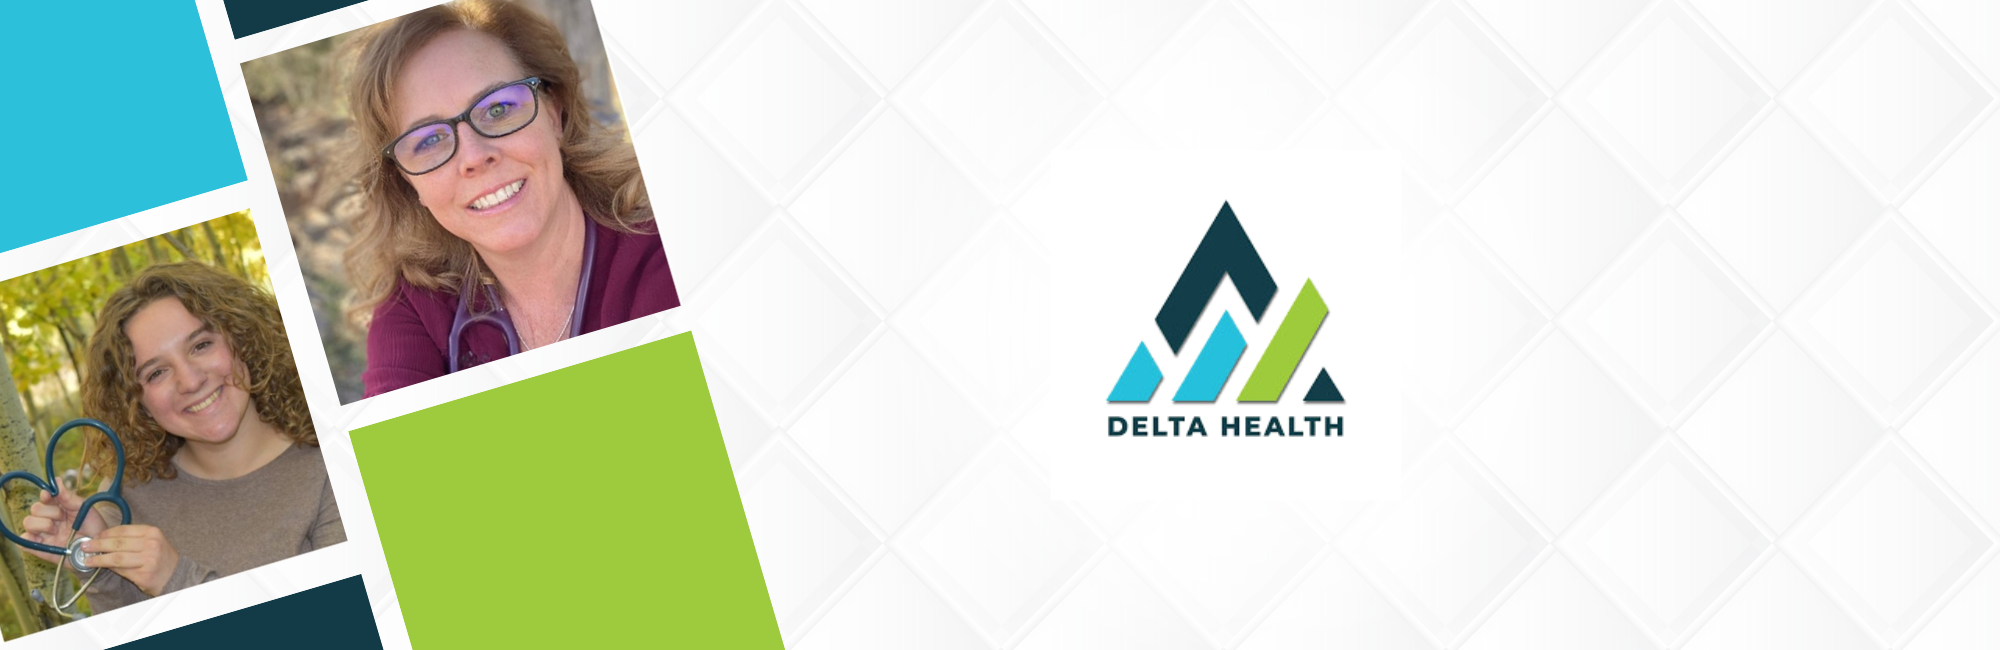 Two nurses smiling and the logo of Delta Health